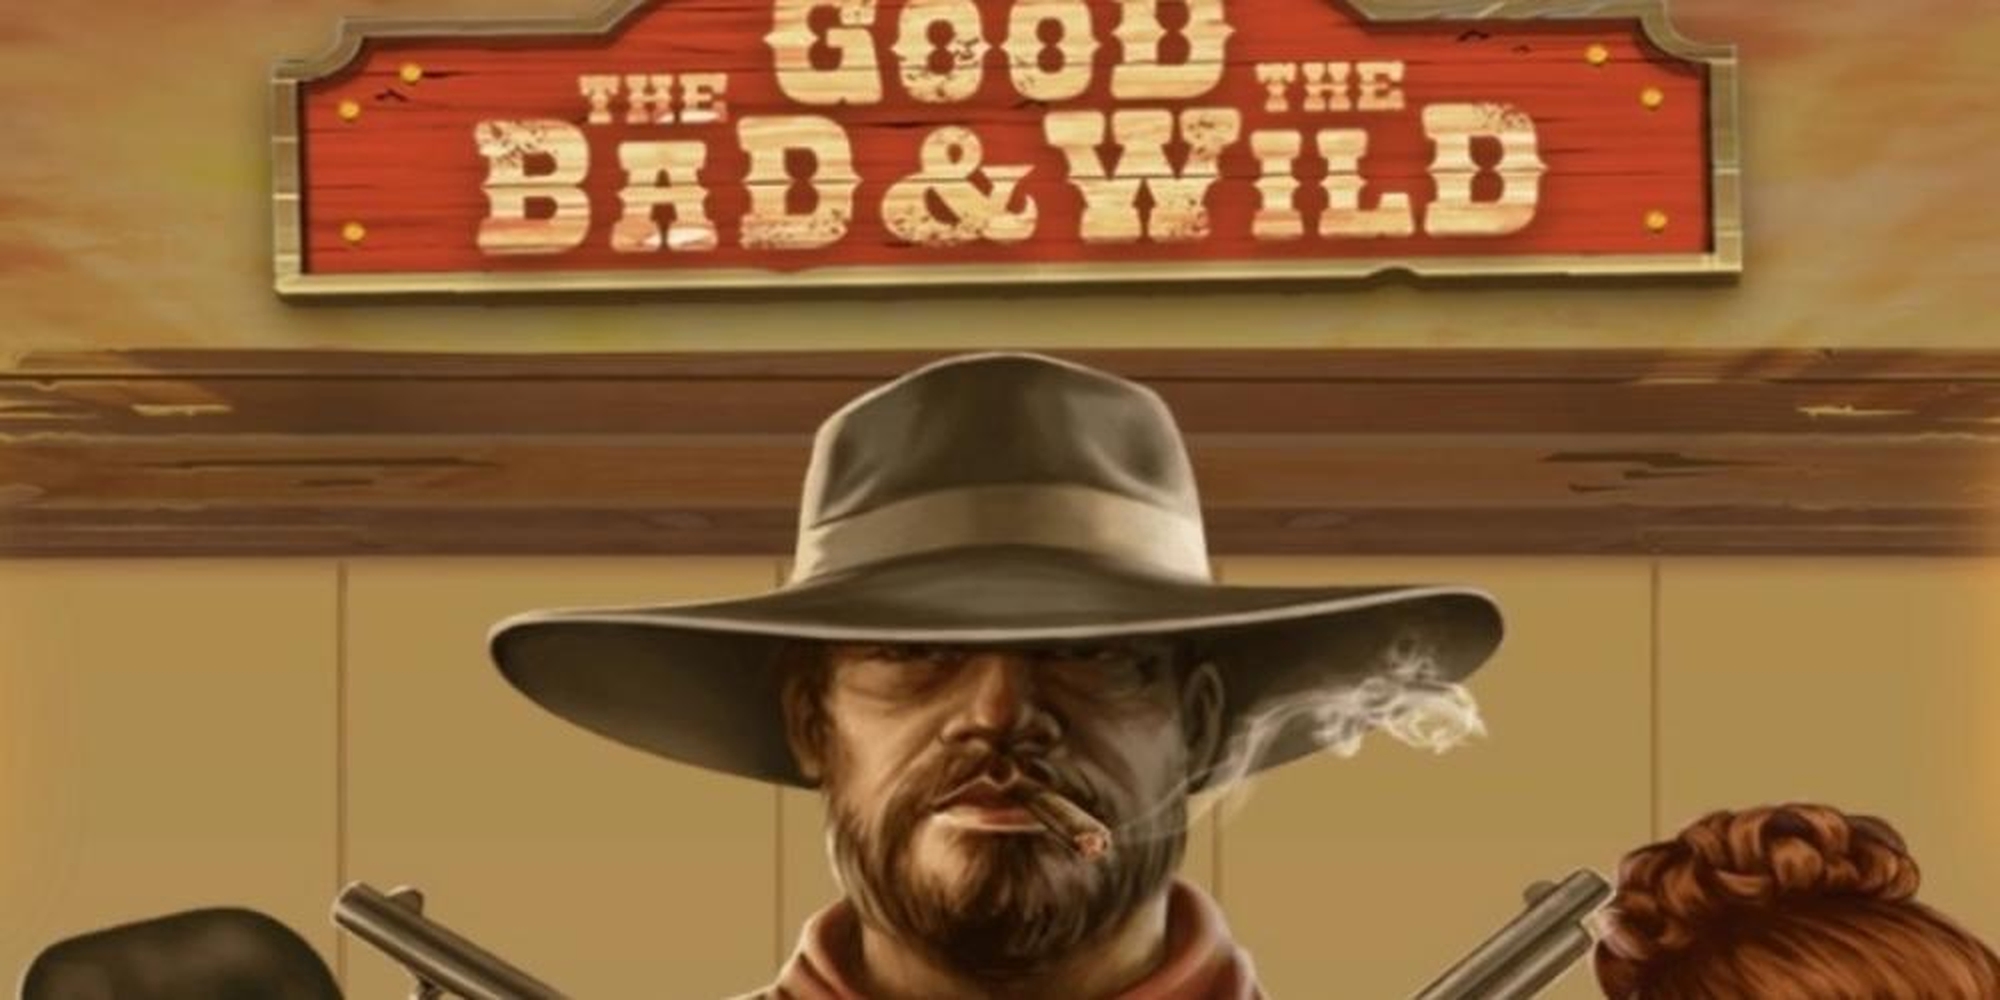 The Good The Bad And The Wild